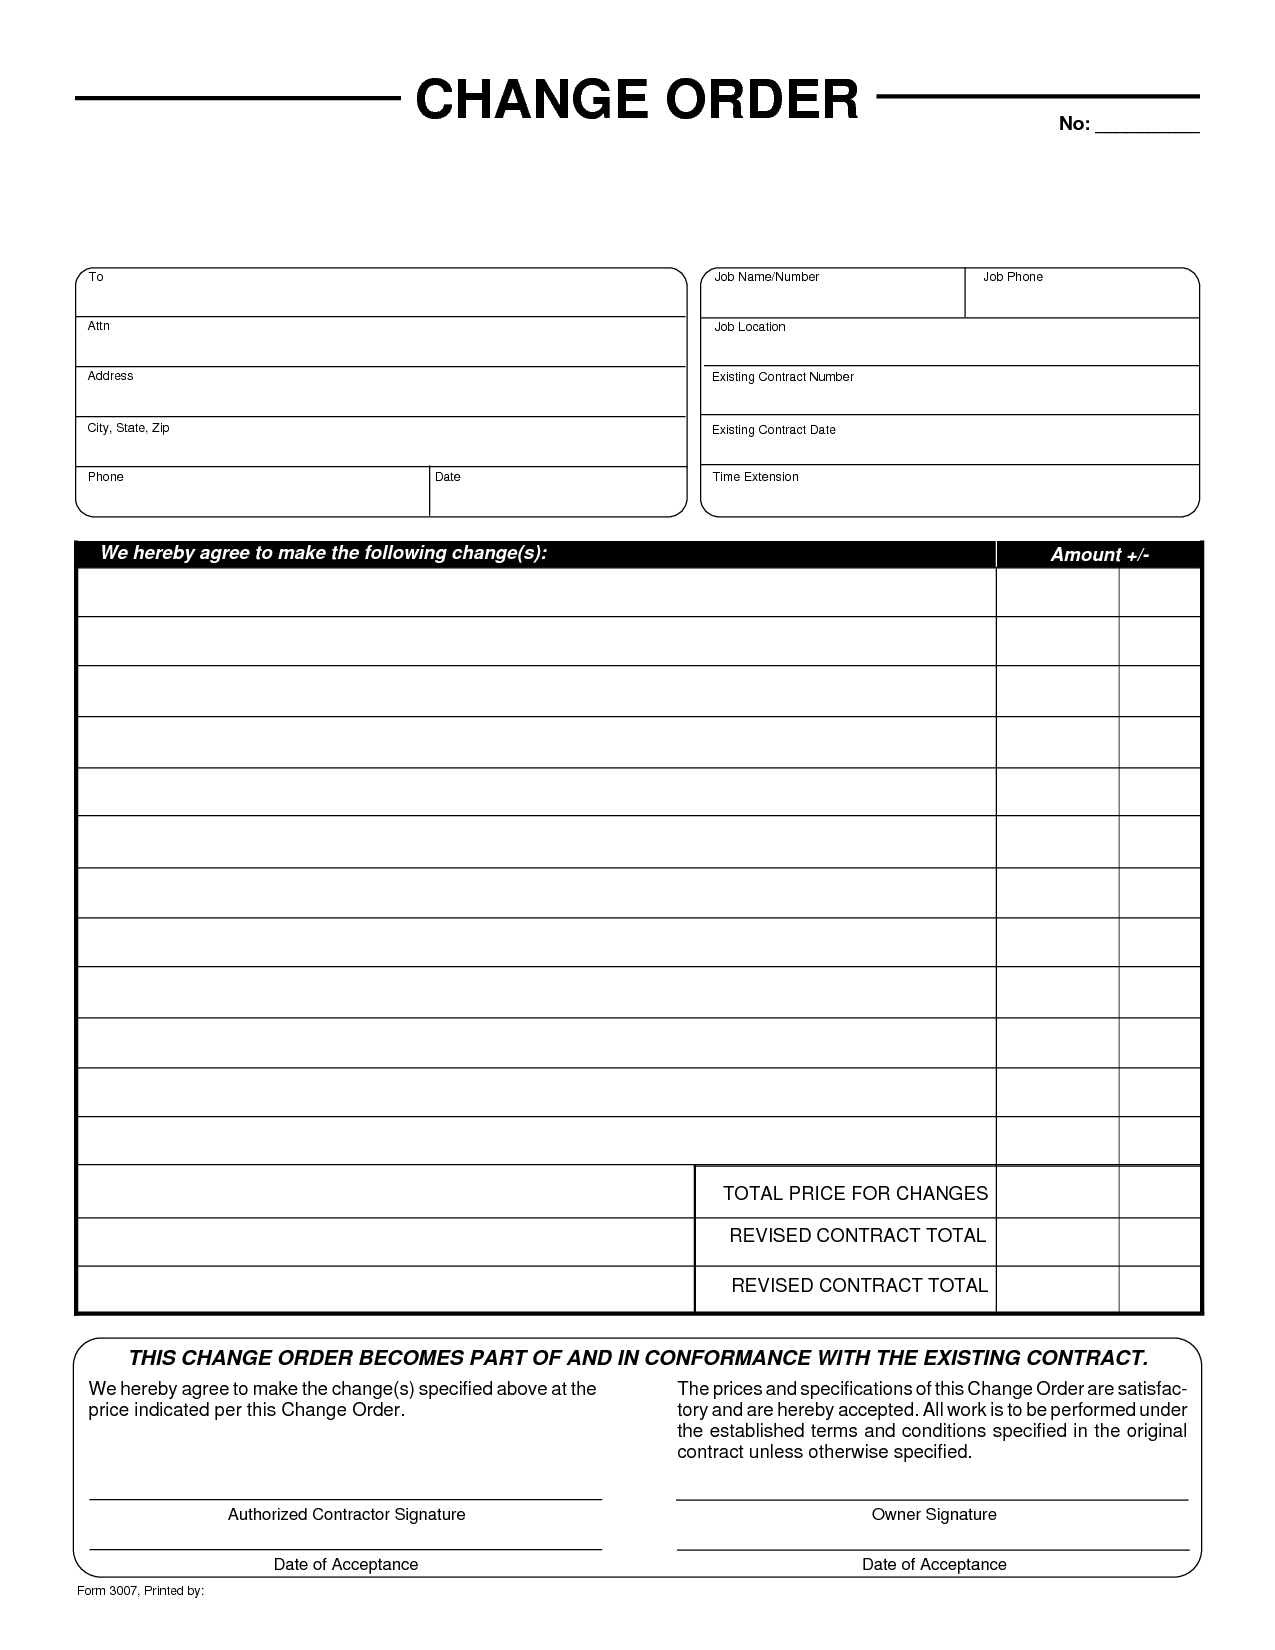 Change Order Form Example